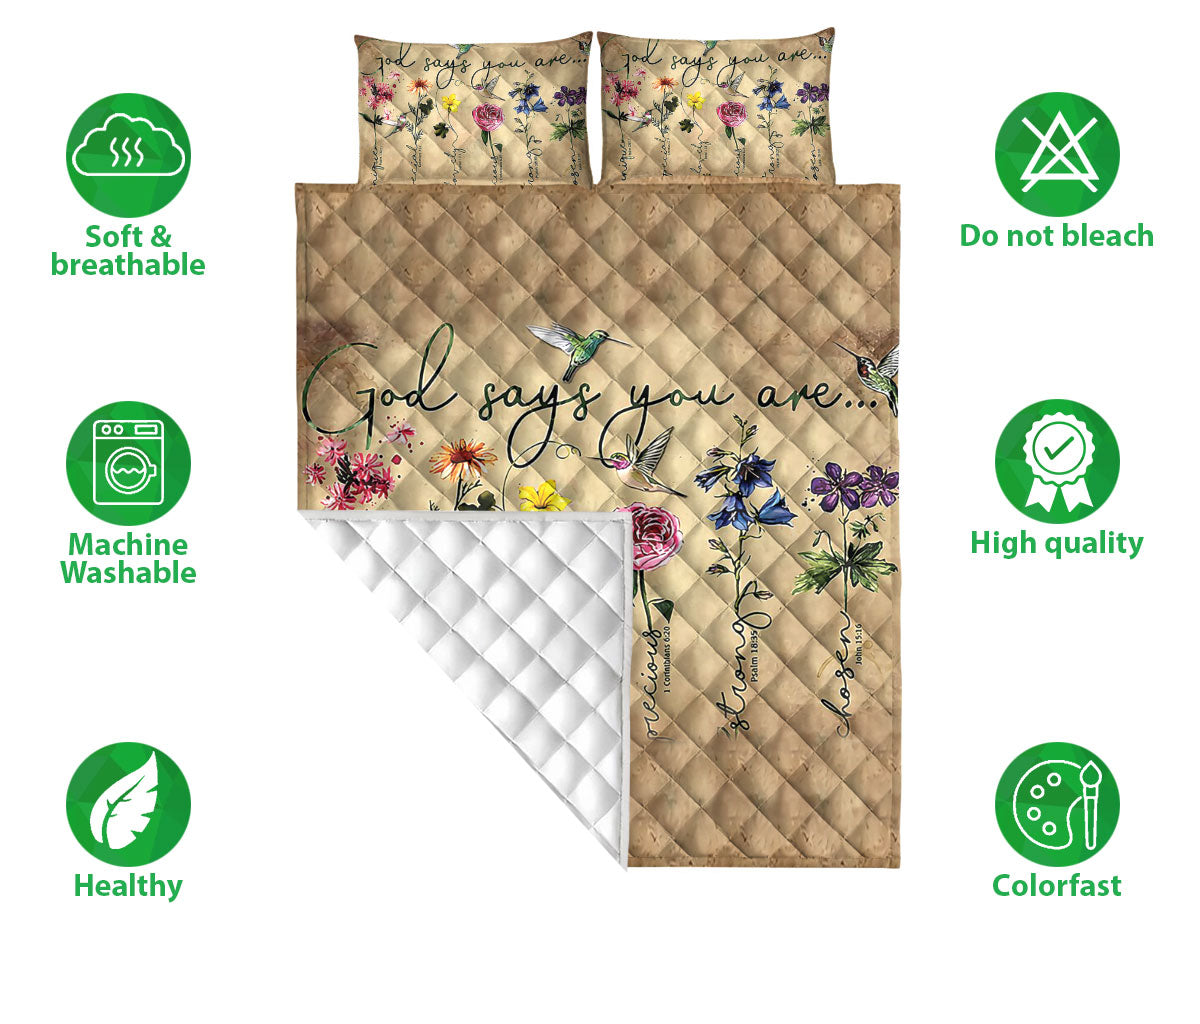 Ohaprints-Quilt-Bed-Set-Pillowcase-God-Says-You-Are-Christ-Flower-Garden-Floral-Beige-Gift-For-Christian-Blanket-Bedspread-Bedding-1991-Double (70'' x 80'')